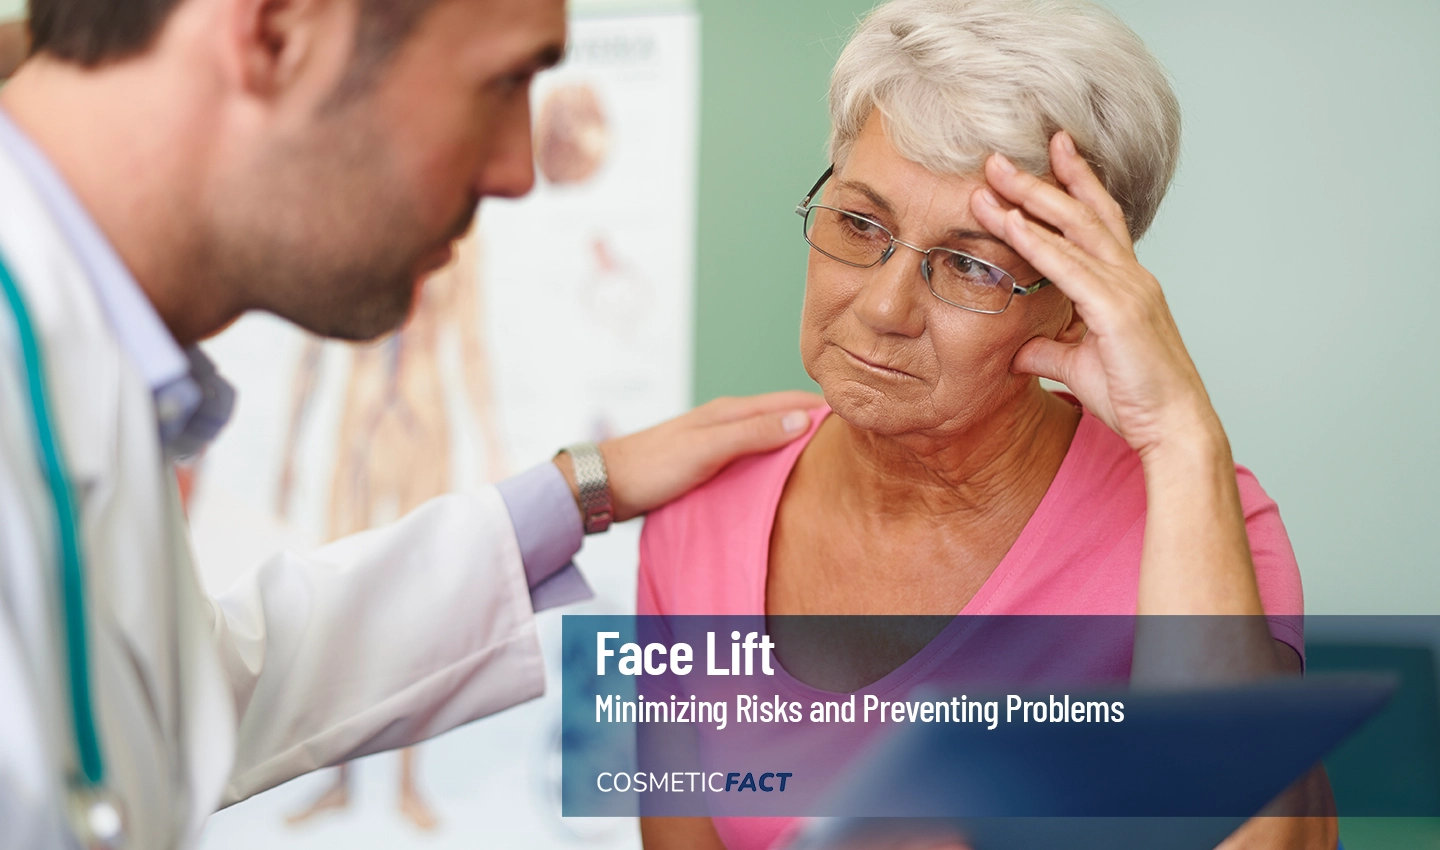 A woman sitting on a chair while a plastic surgeon examines her face, discussing facelift complications and ways to minimize their risks.